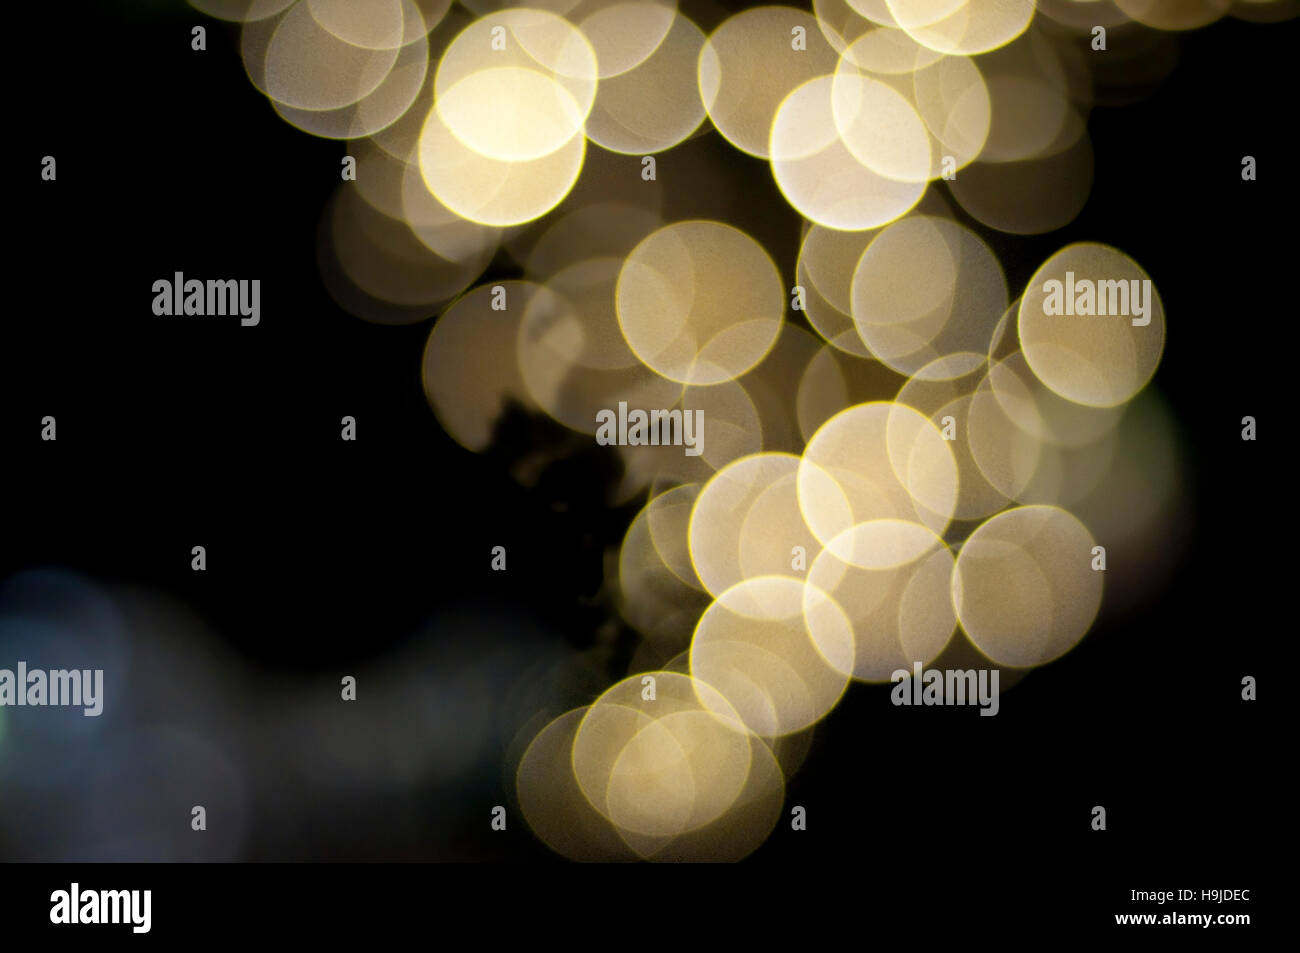 Festive yellow and white lights boke (blur) in landscape orientation that look like grapes Stock Photo